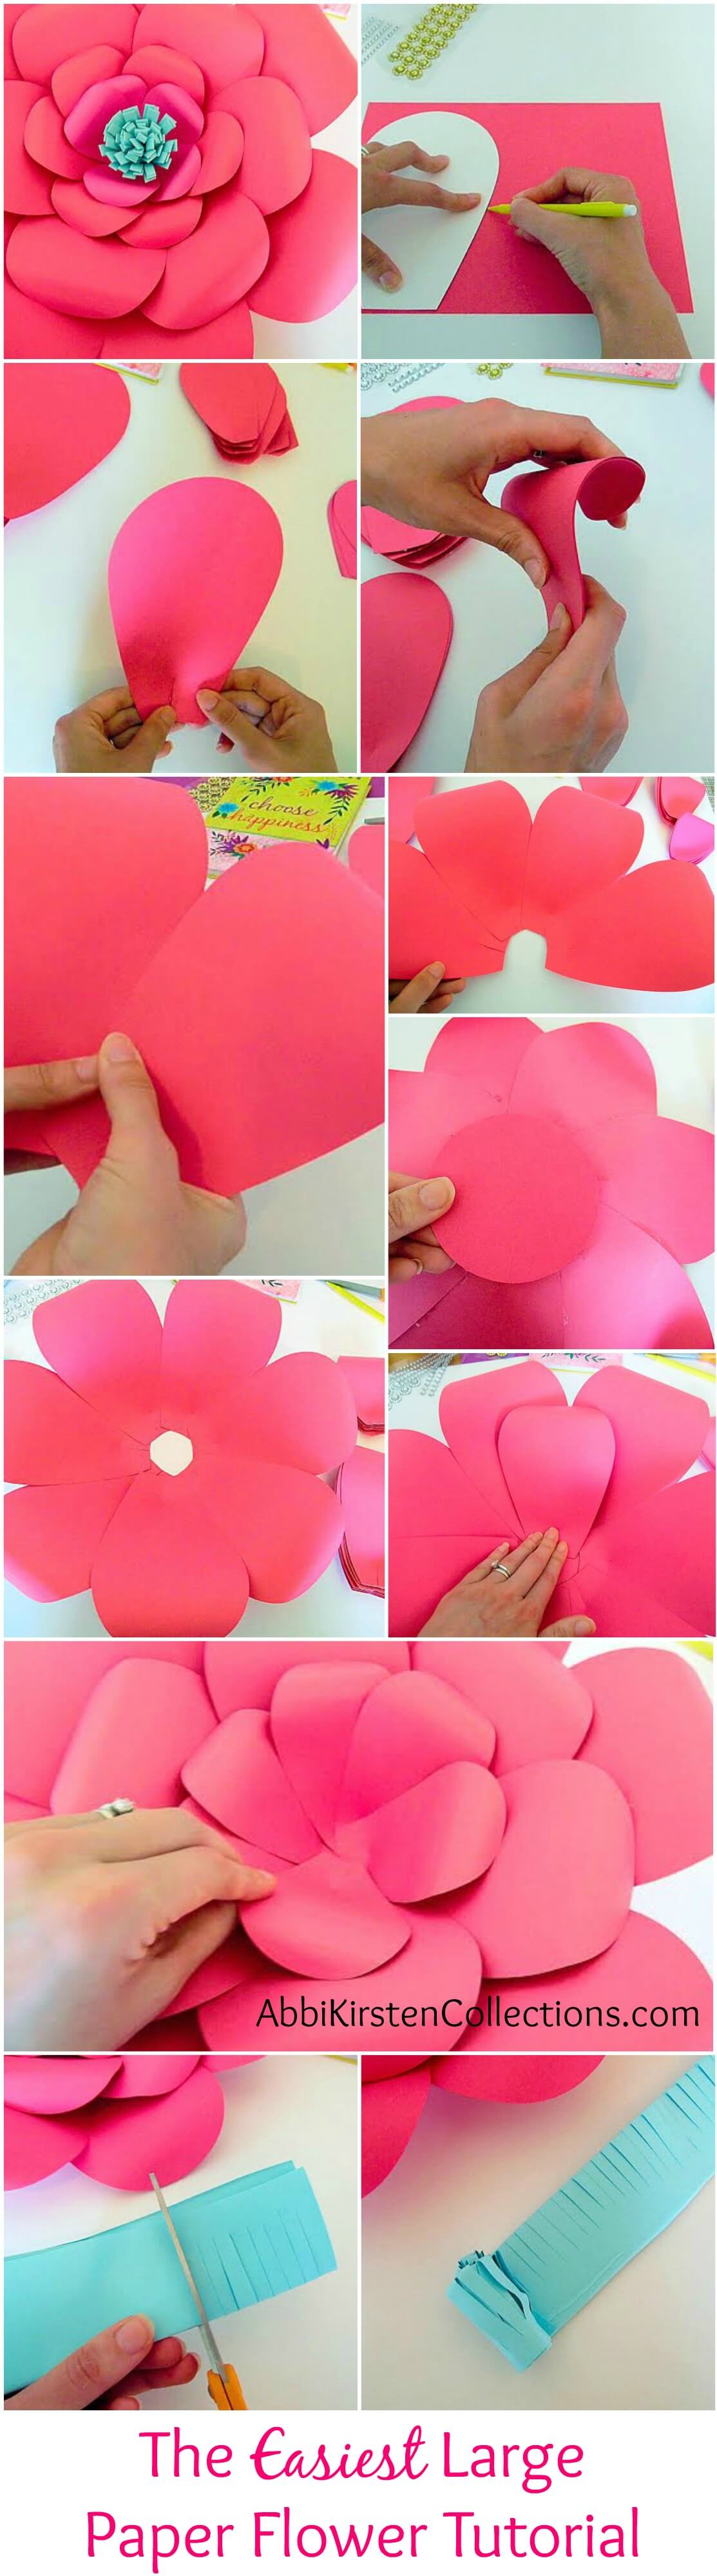 How to Make Large Paper Flowers: Easy DIY Giant Paper Flower